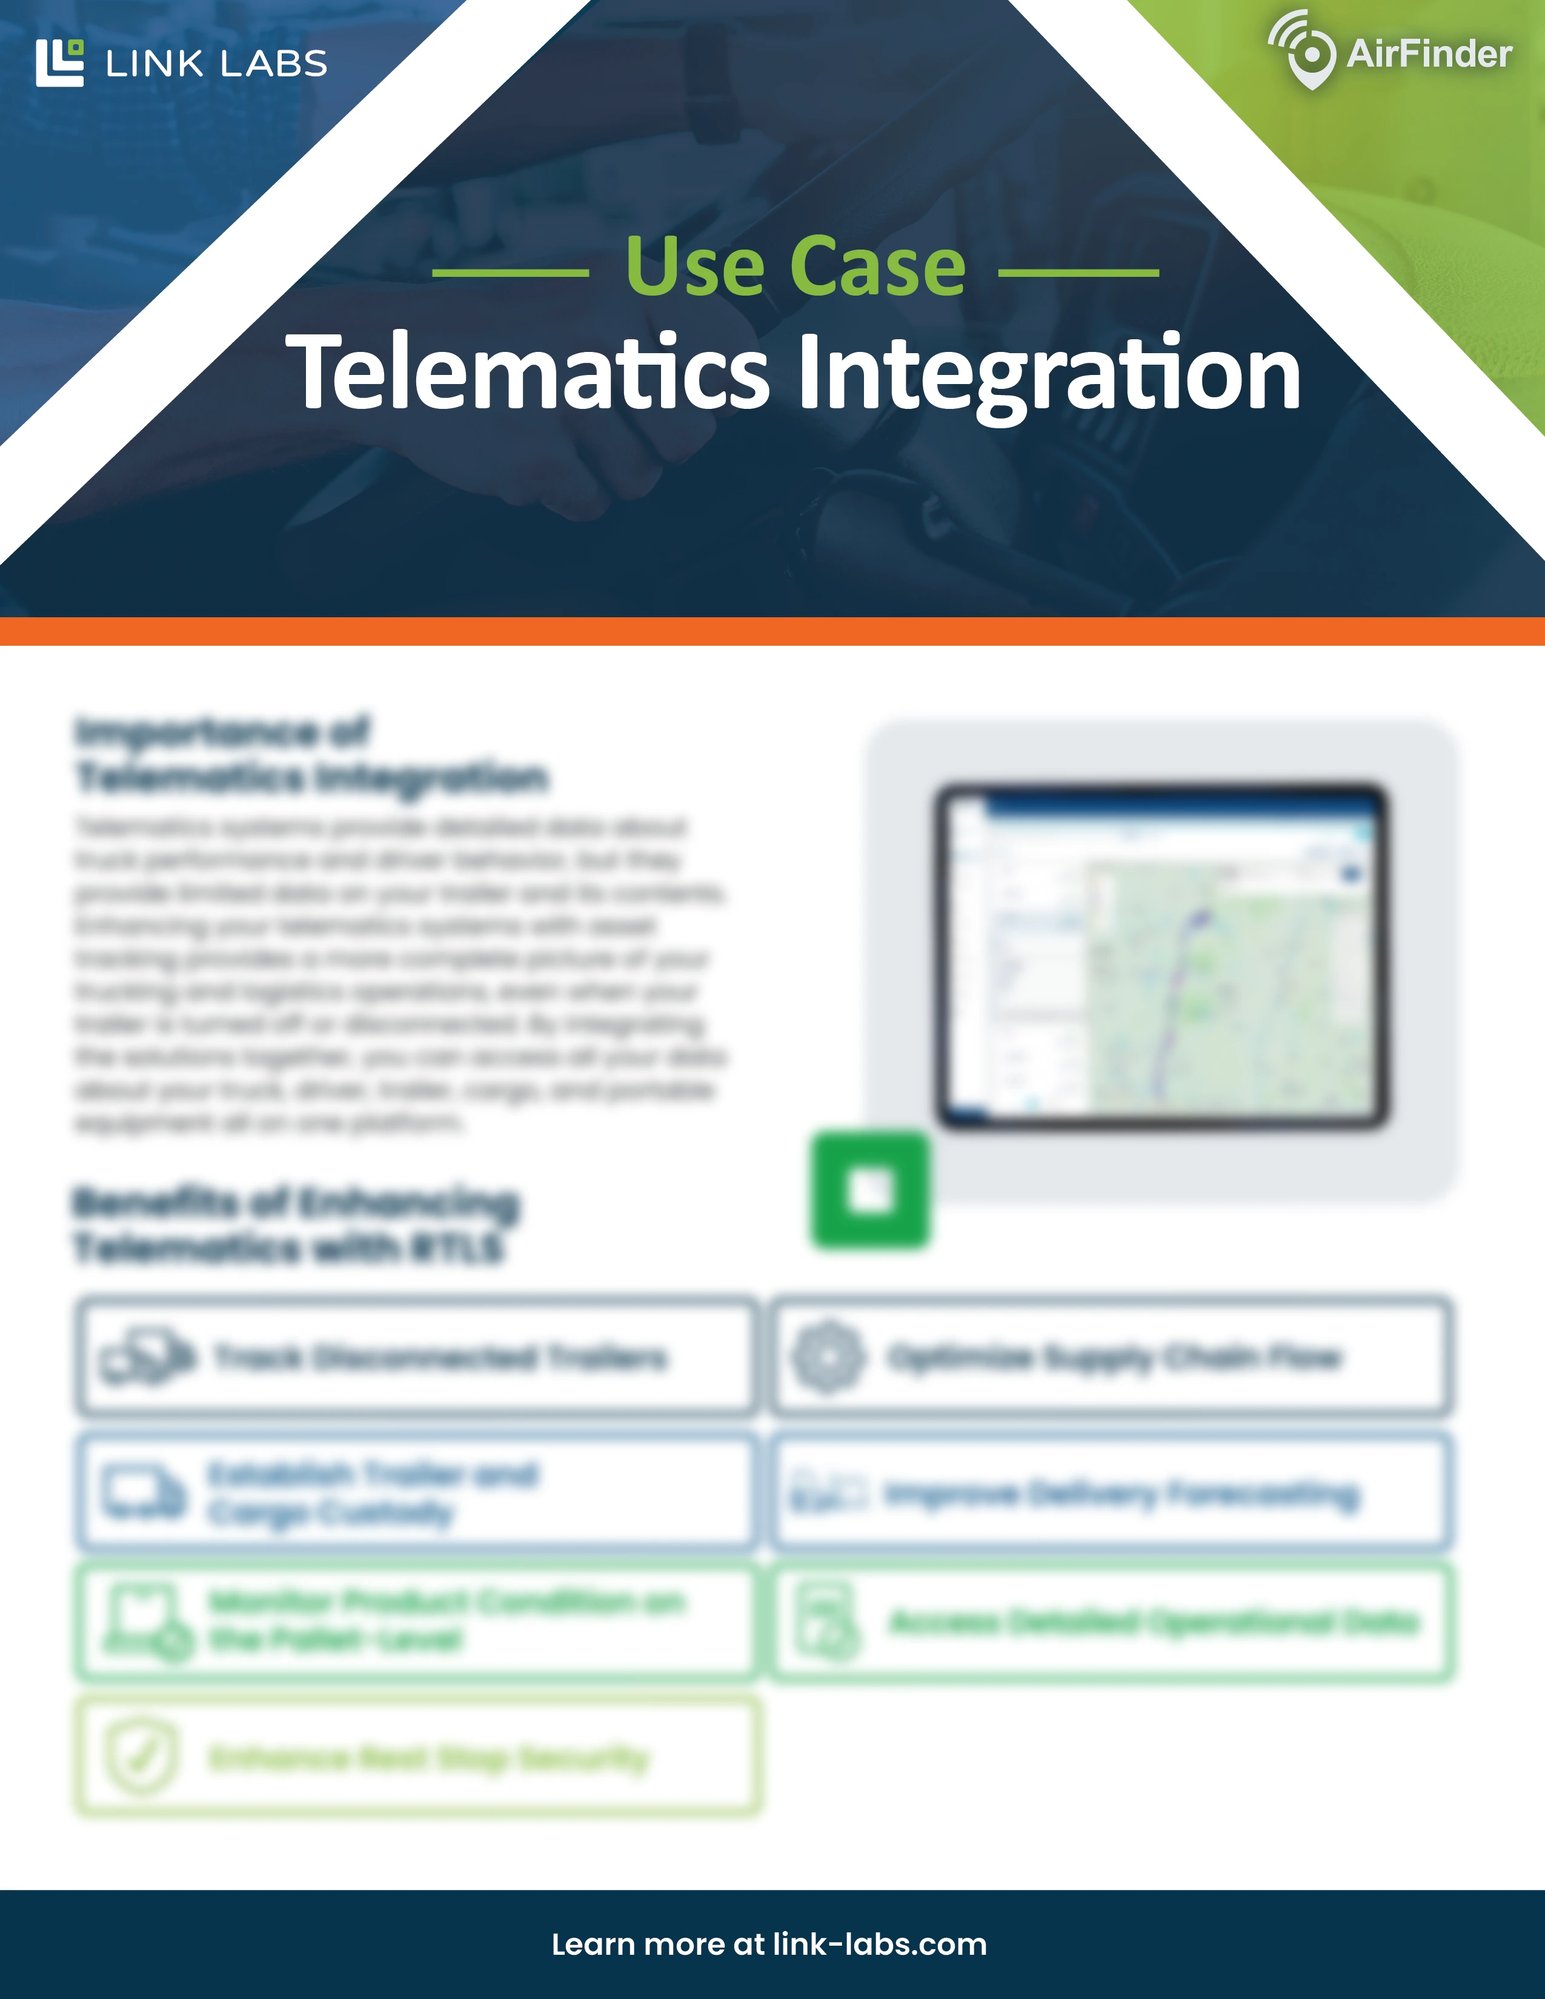 Telematics integration with trailer tracking